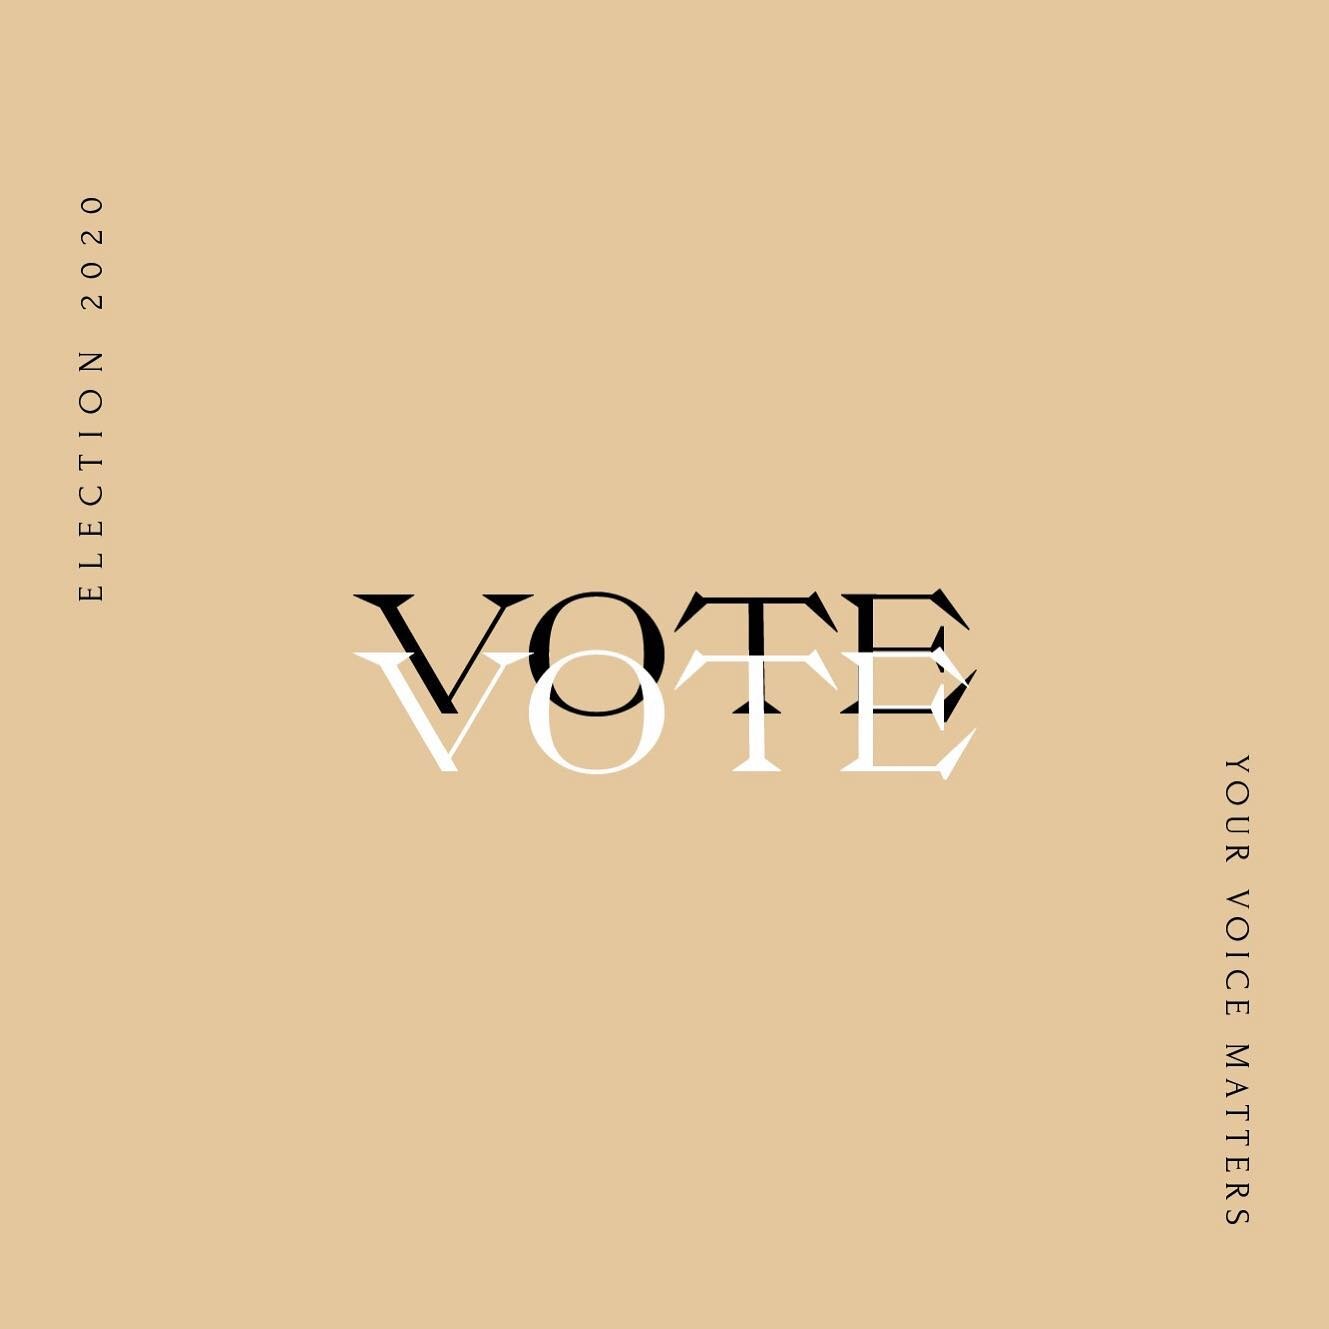 It&rsquo;s Election Day! Go vote. 

After you have voted, take care of yourself today. Make time for quiet and calm while following the election. Go for a run, listen to an upbeat playlist, escape into a book, do some yoga, or meditate. We are all fe